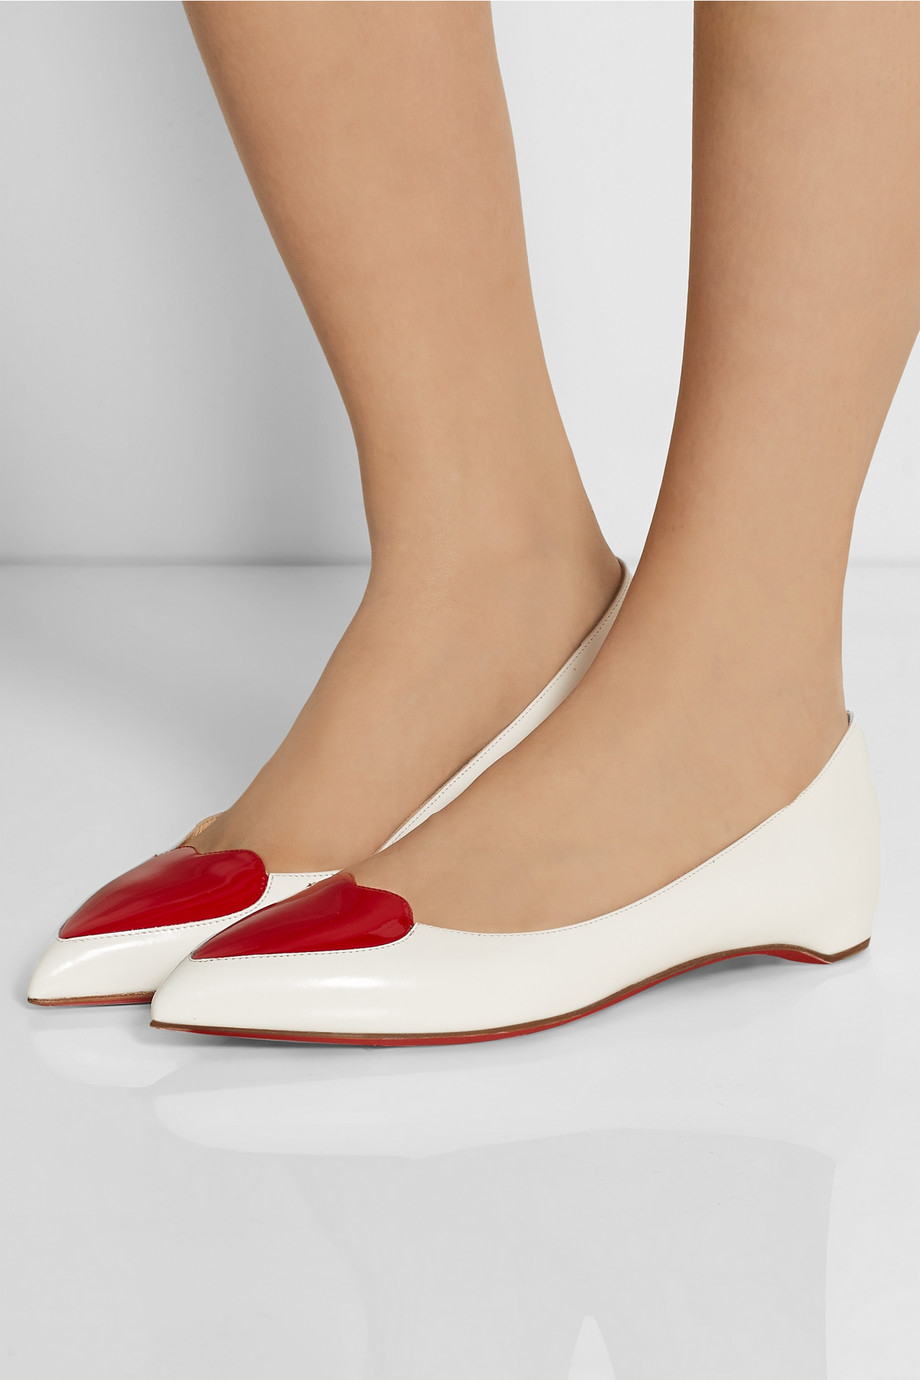 Lyst Christian Louboutin Corafront Patent Leather Point Toe Flats In White 6958